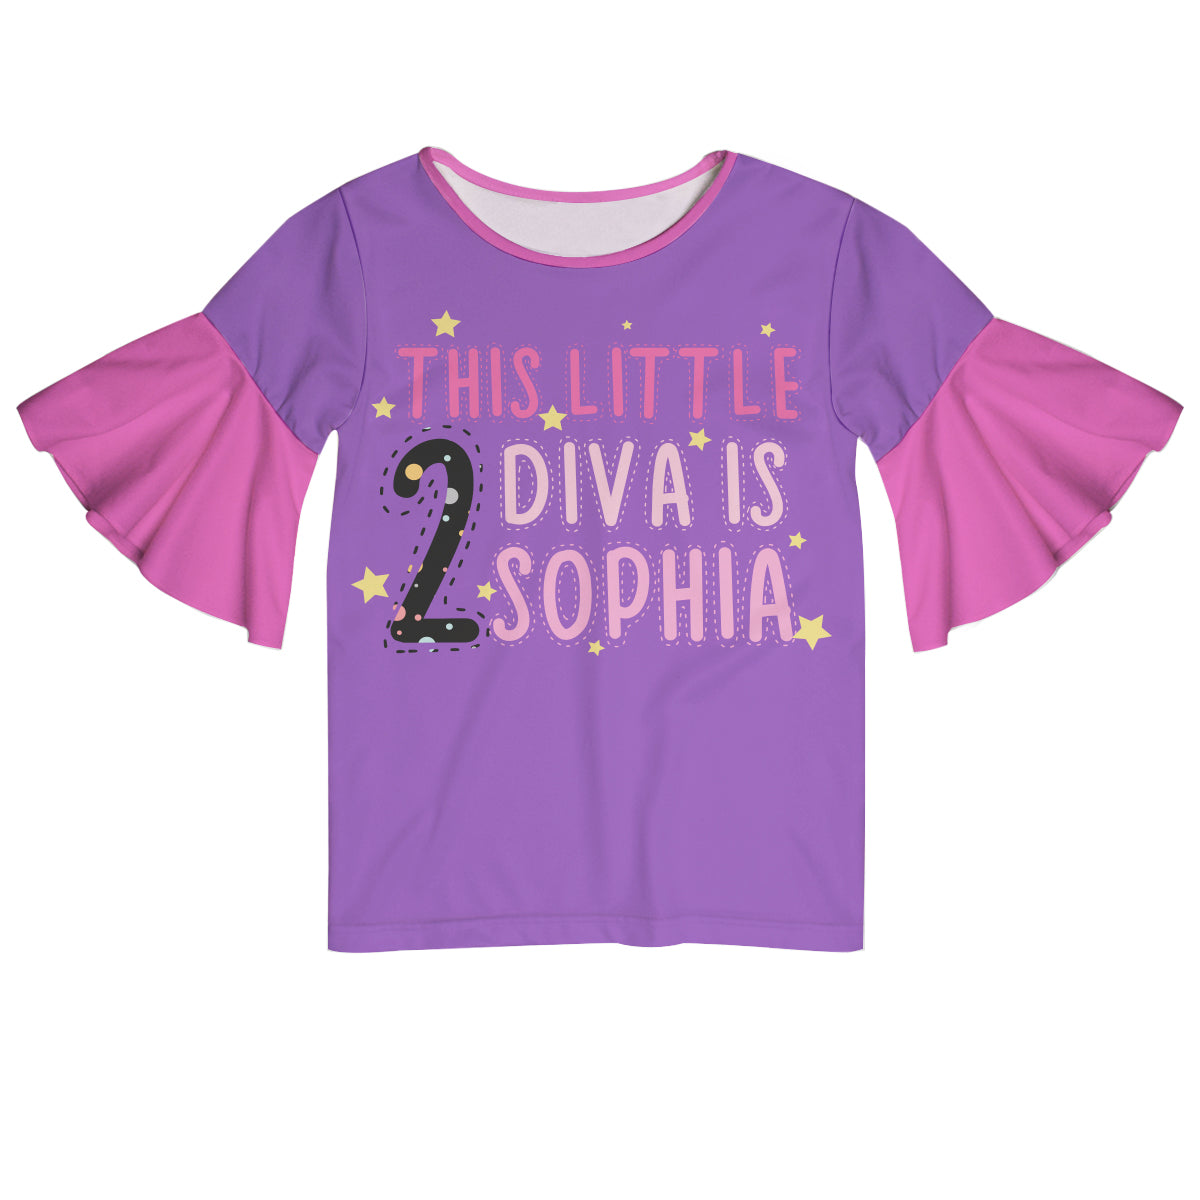 This Little Diva Is Name and Your Age Purple Short Sleeve Ruffle Top